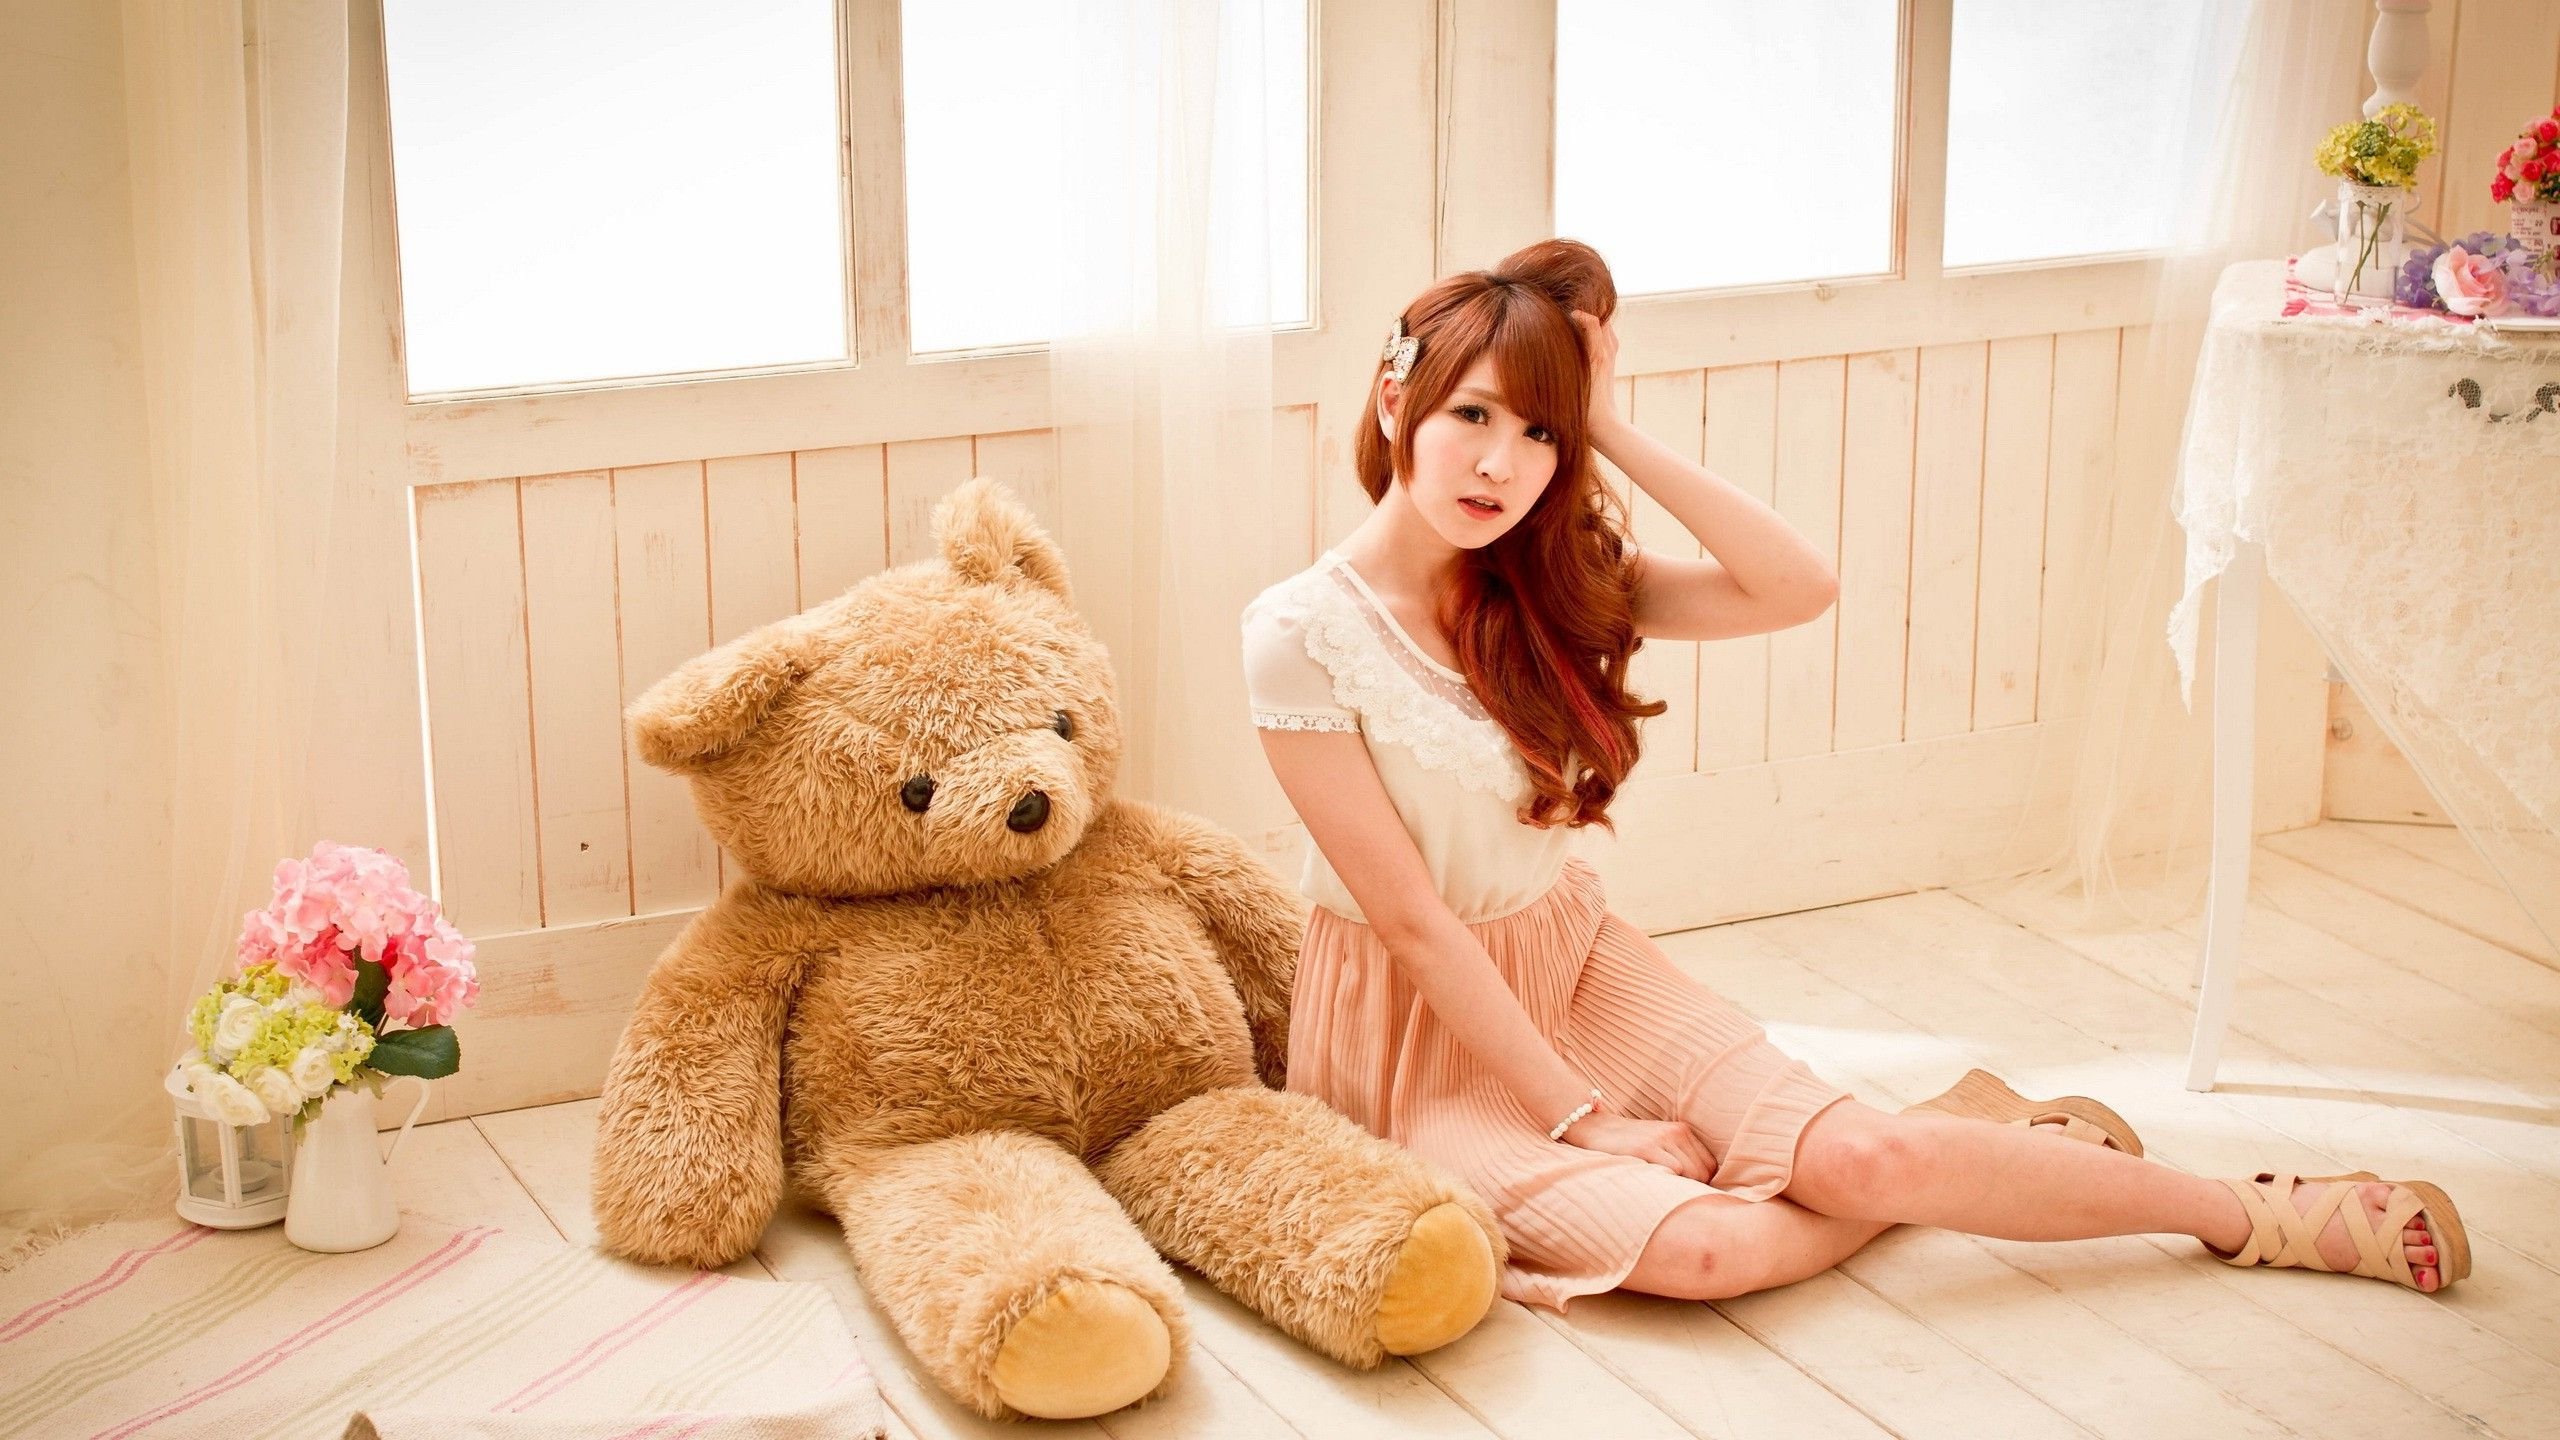 Happy Teddy Day 2023 Messages